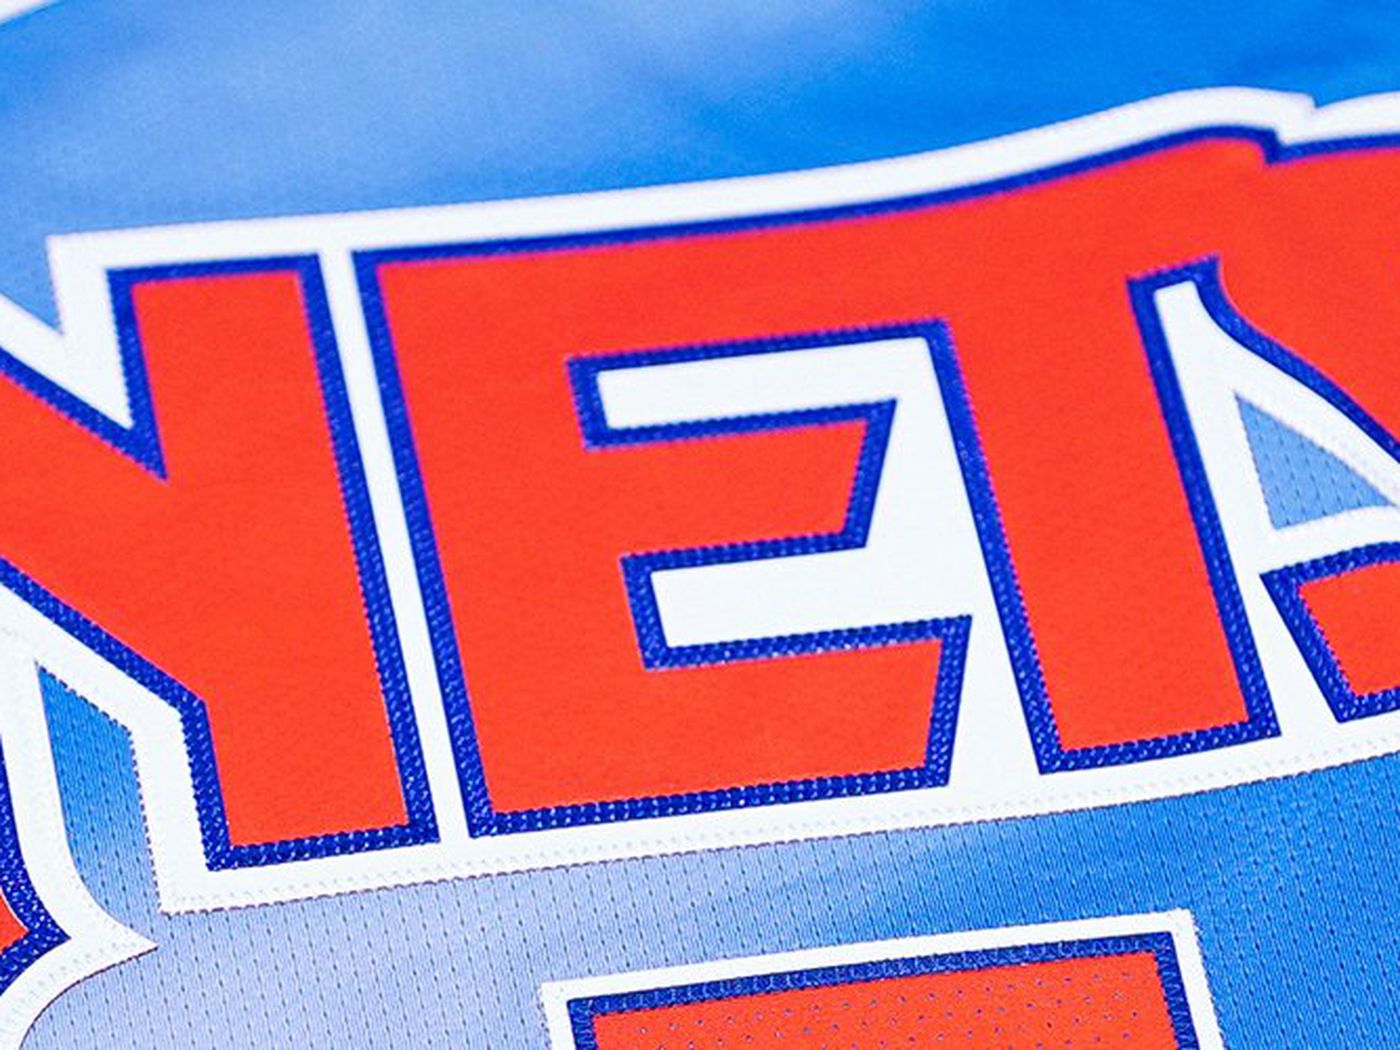 IT'S OFFICIAL: Nets bringing back New Jersey retro unis